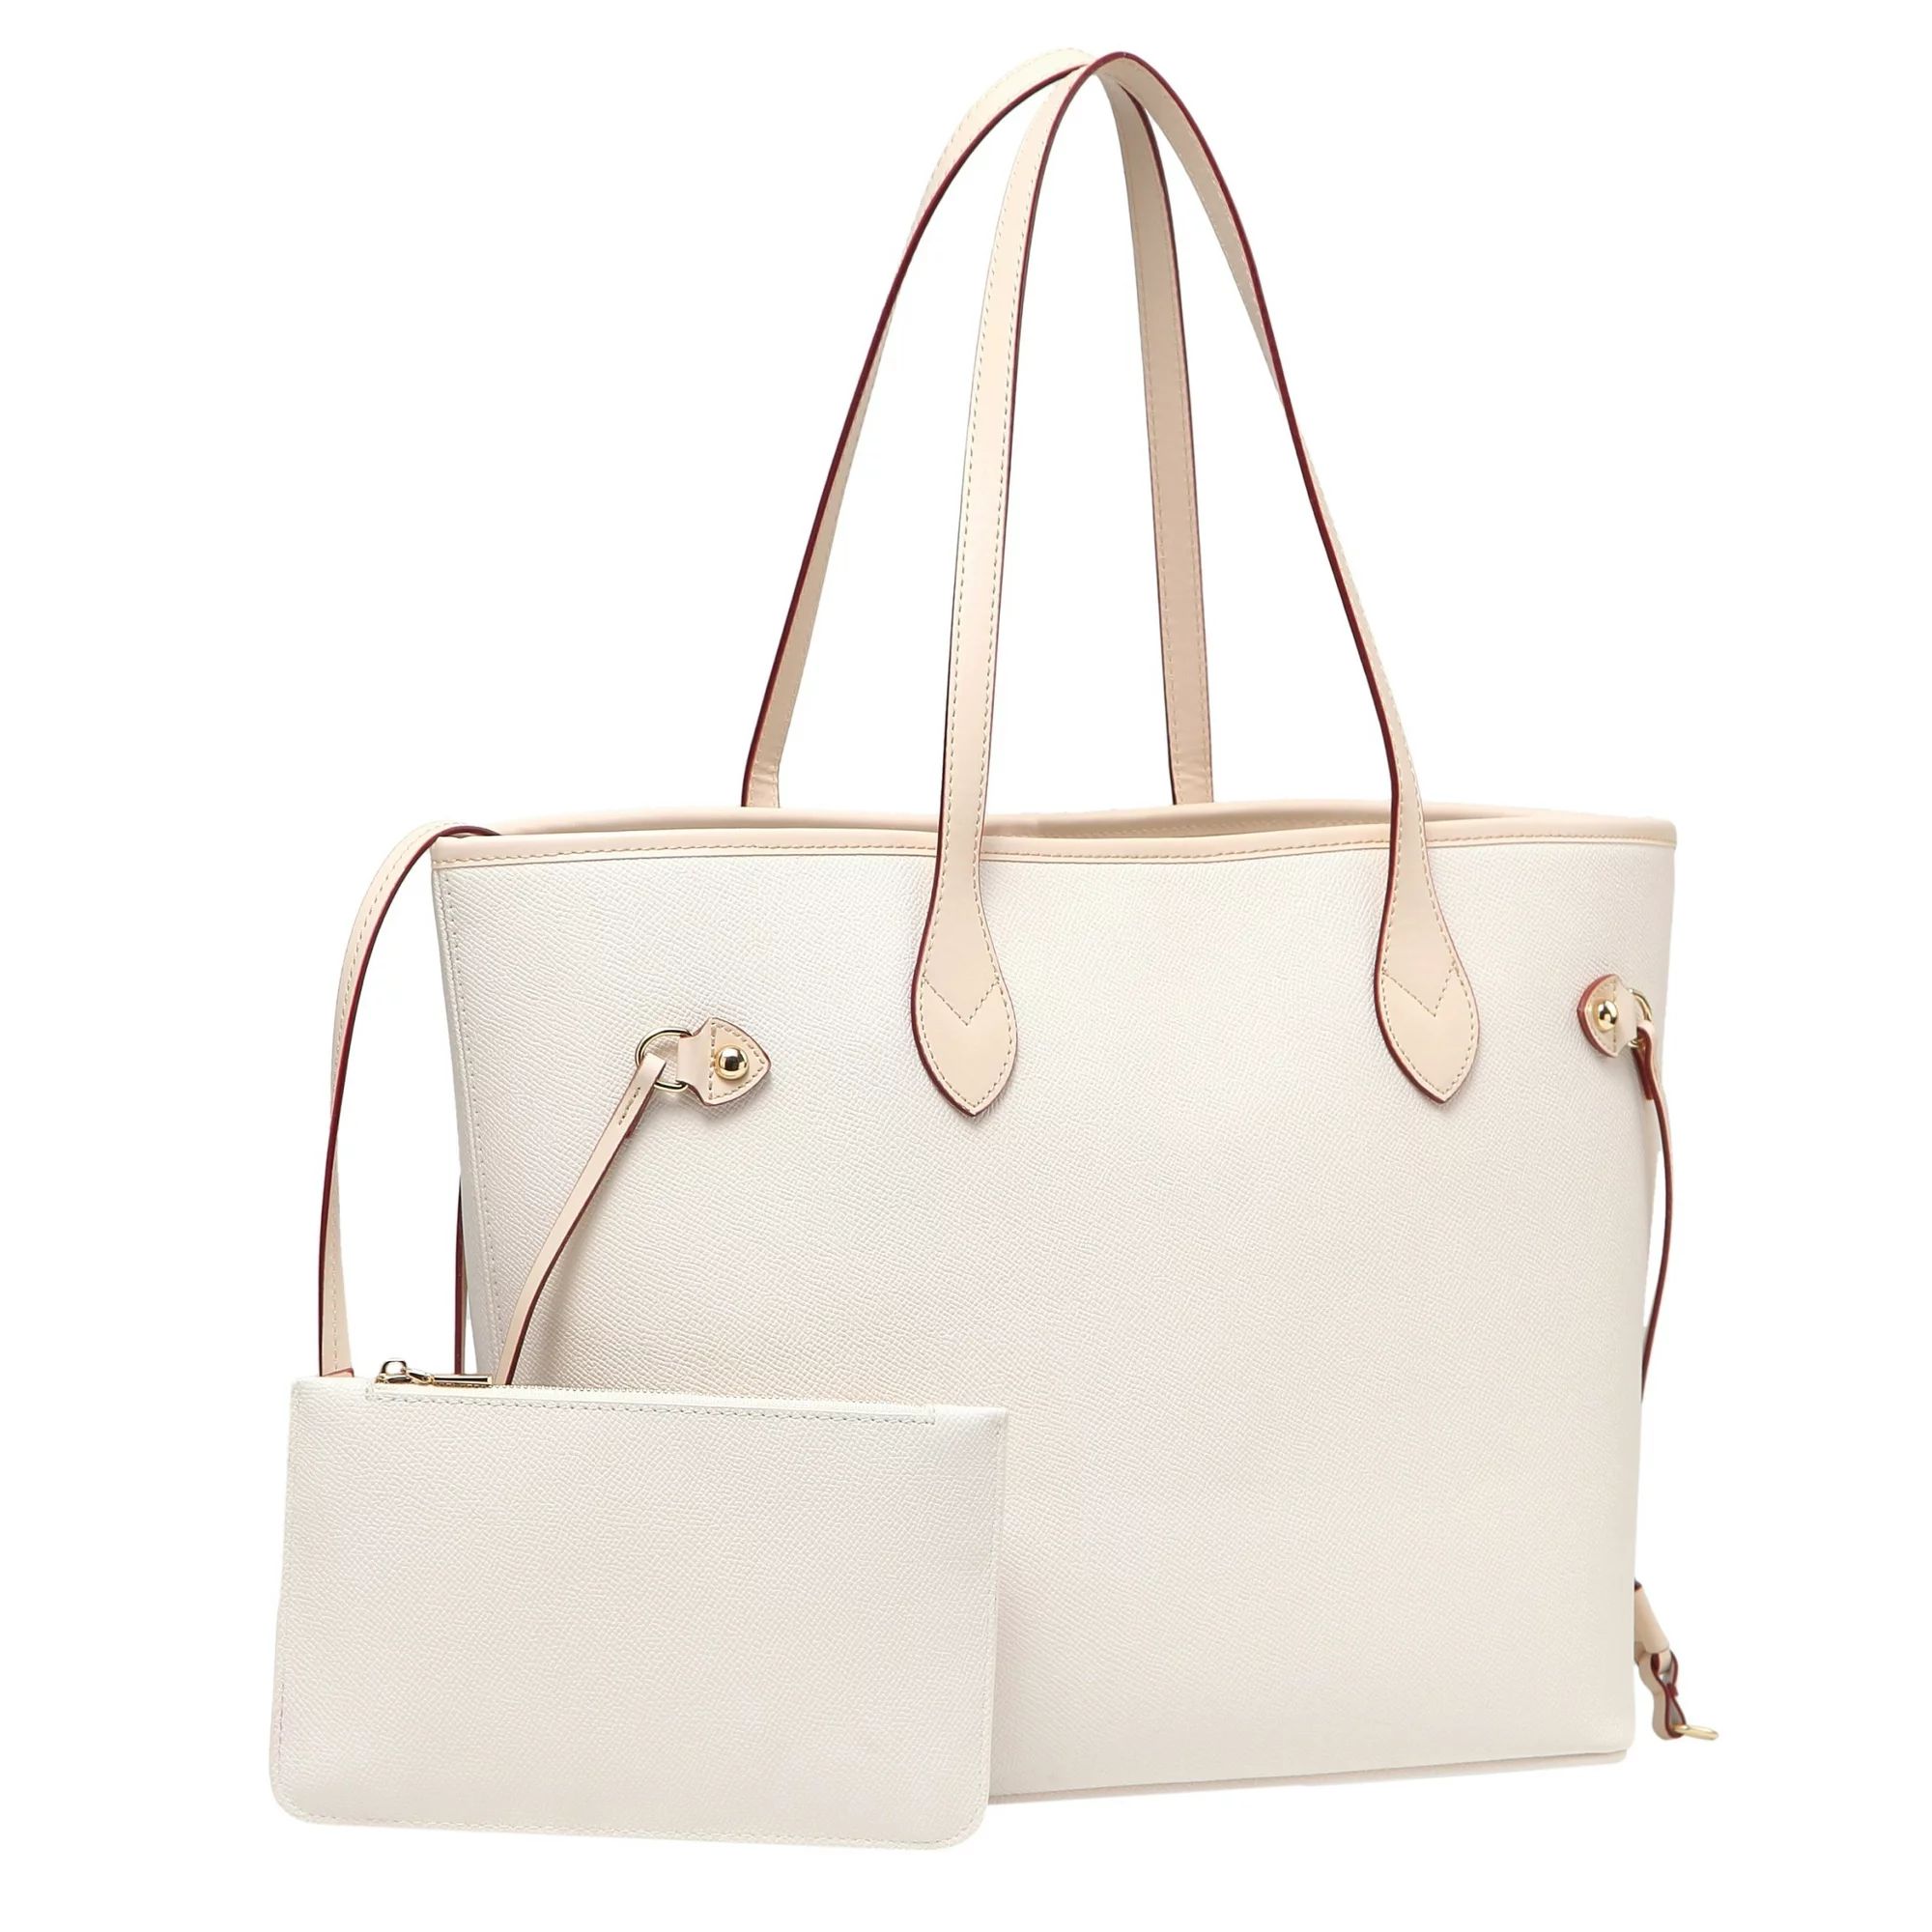 Daisy Rose Tote Shoulder Bag with inner pouch - PU Vegan Leather - Cream | Walmart (US)